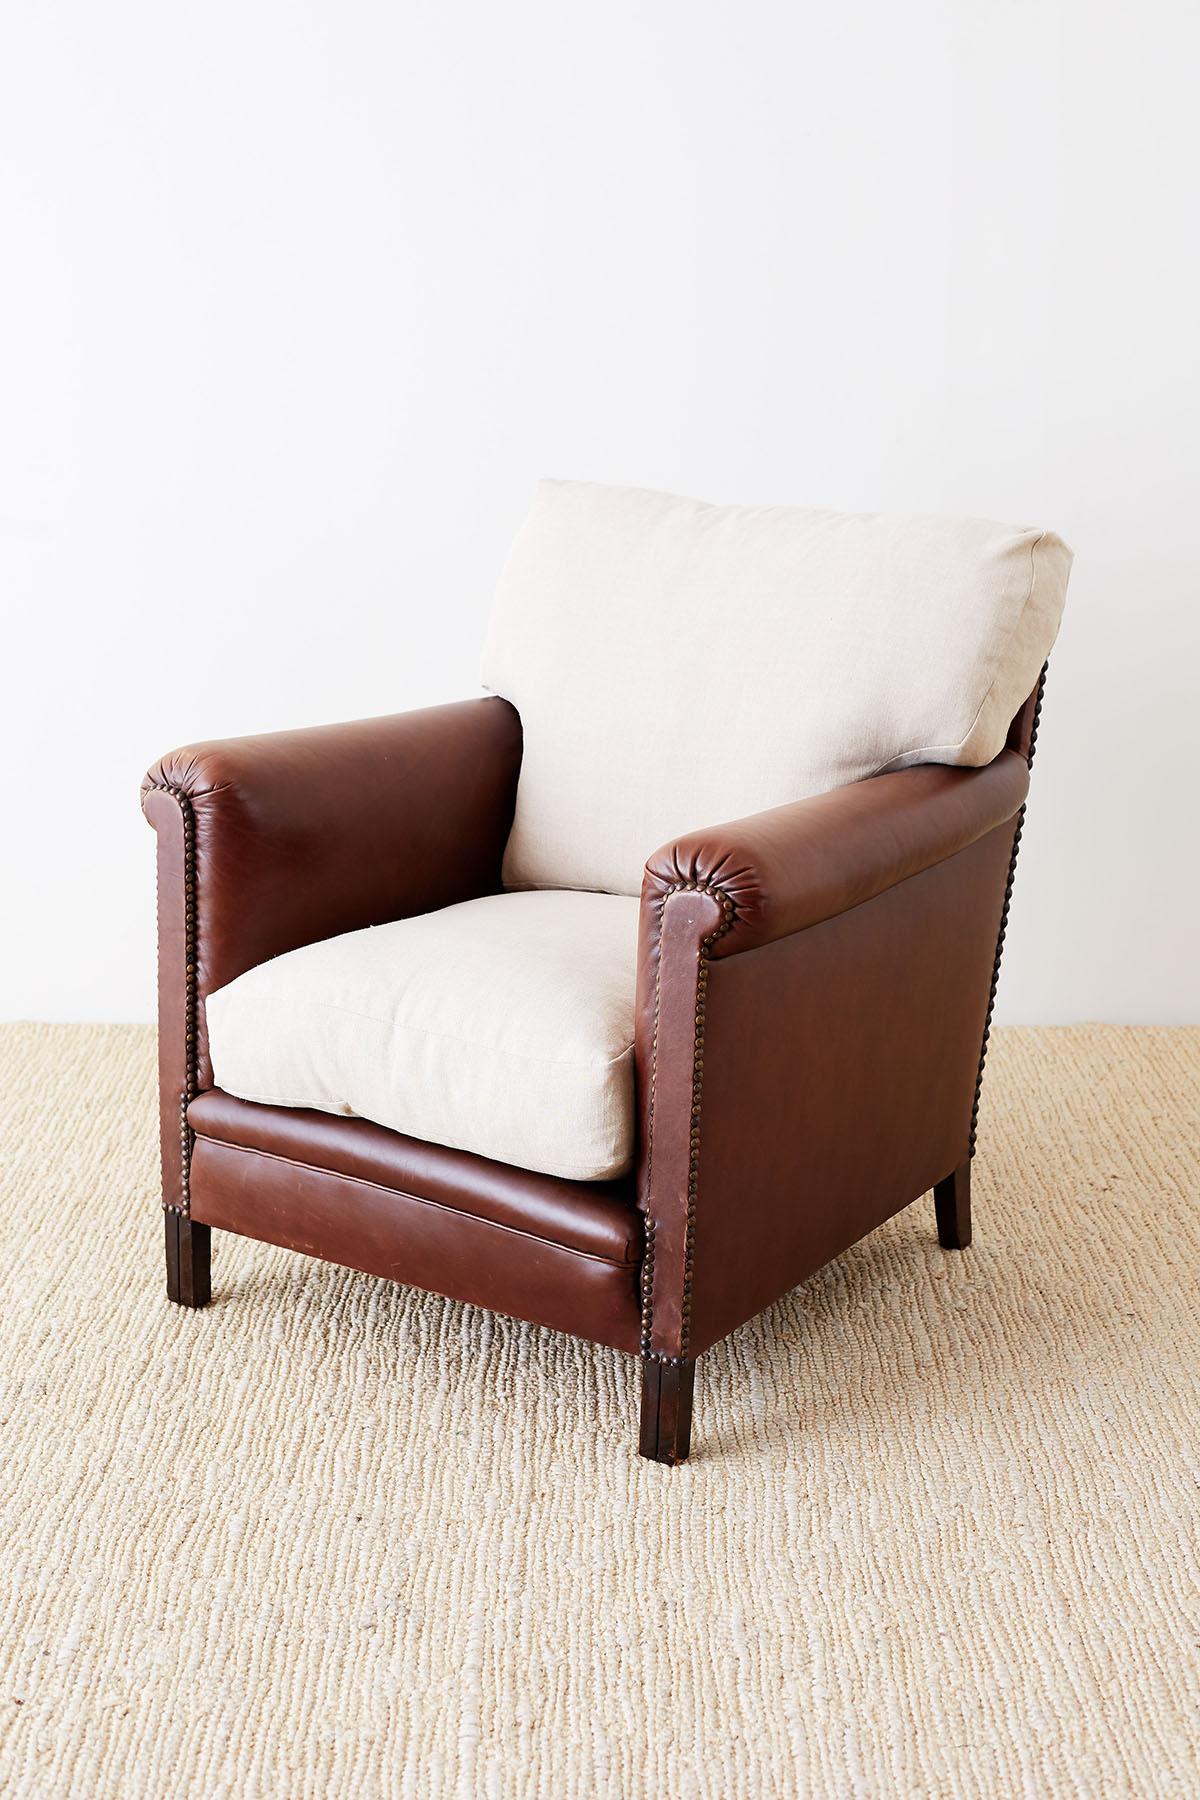 American 20th century leather club chair or lounge chair made in the Art Deco taste. The chair features a deep seat with flat, straight arms that are subtly rolled on the top. The generous seat has thick, fitted loose seat cushions that are down